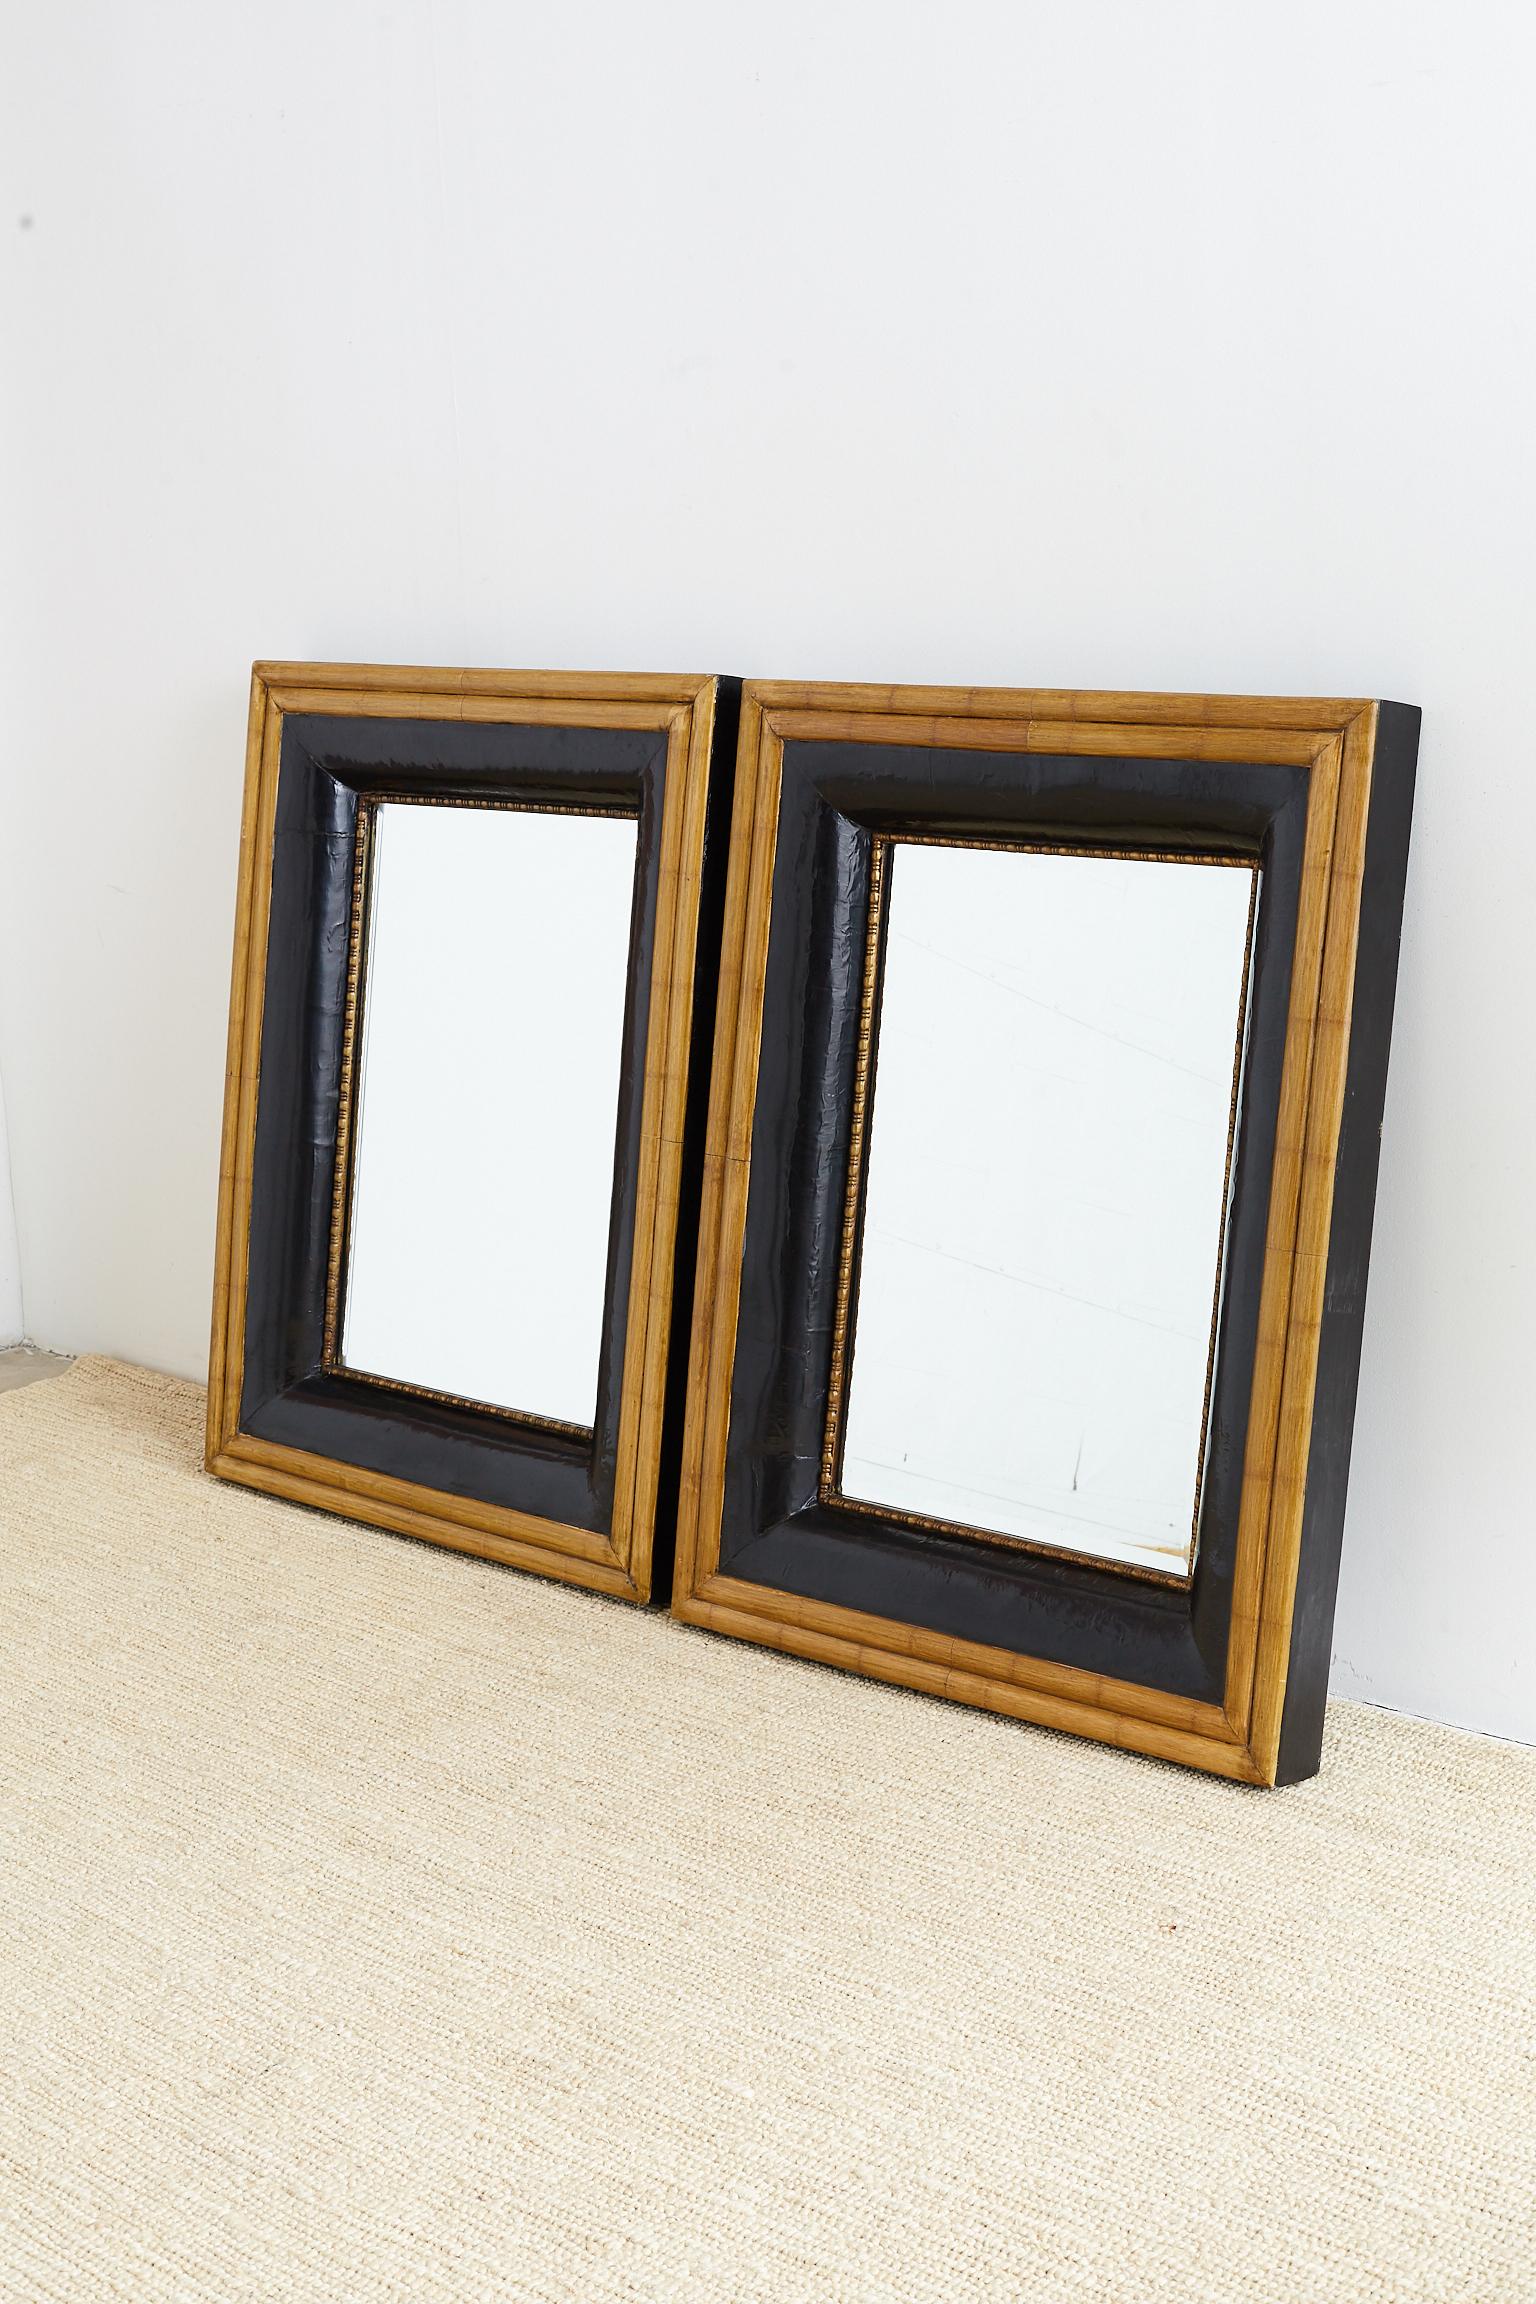 Hollywood Regency Pair of Portuguese Mirrors with Faux Bamboo Trim